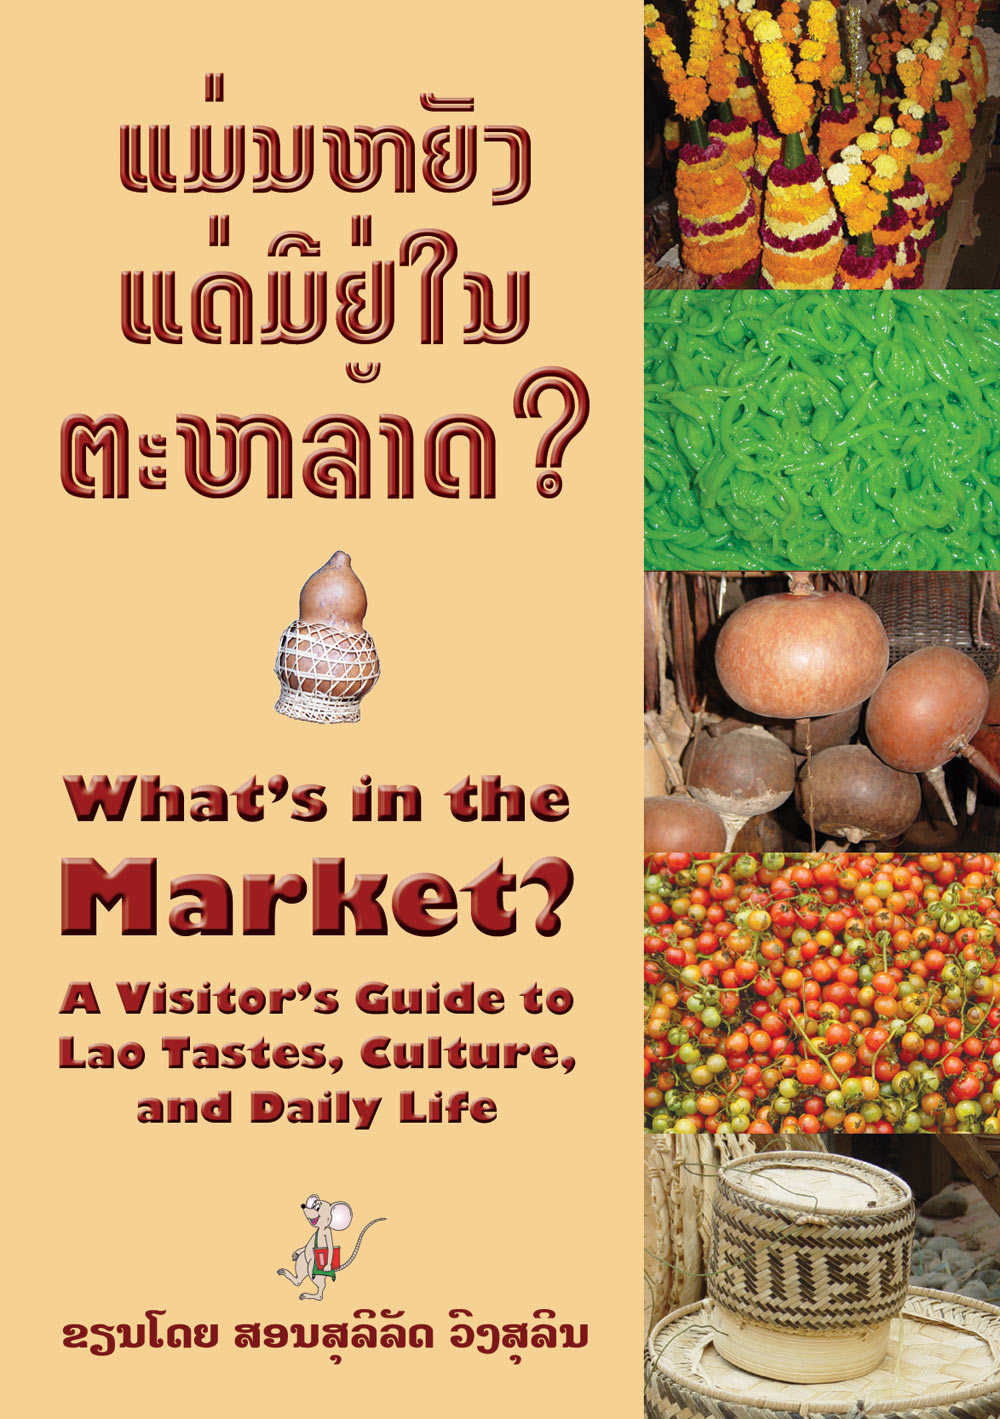 What's in the Market? large book cover, published in Lao and English